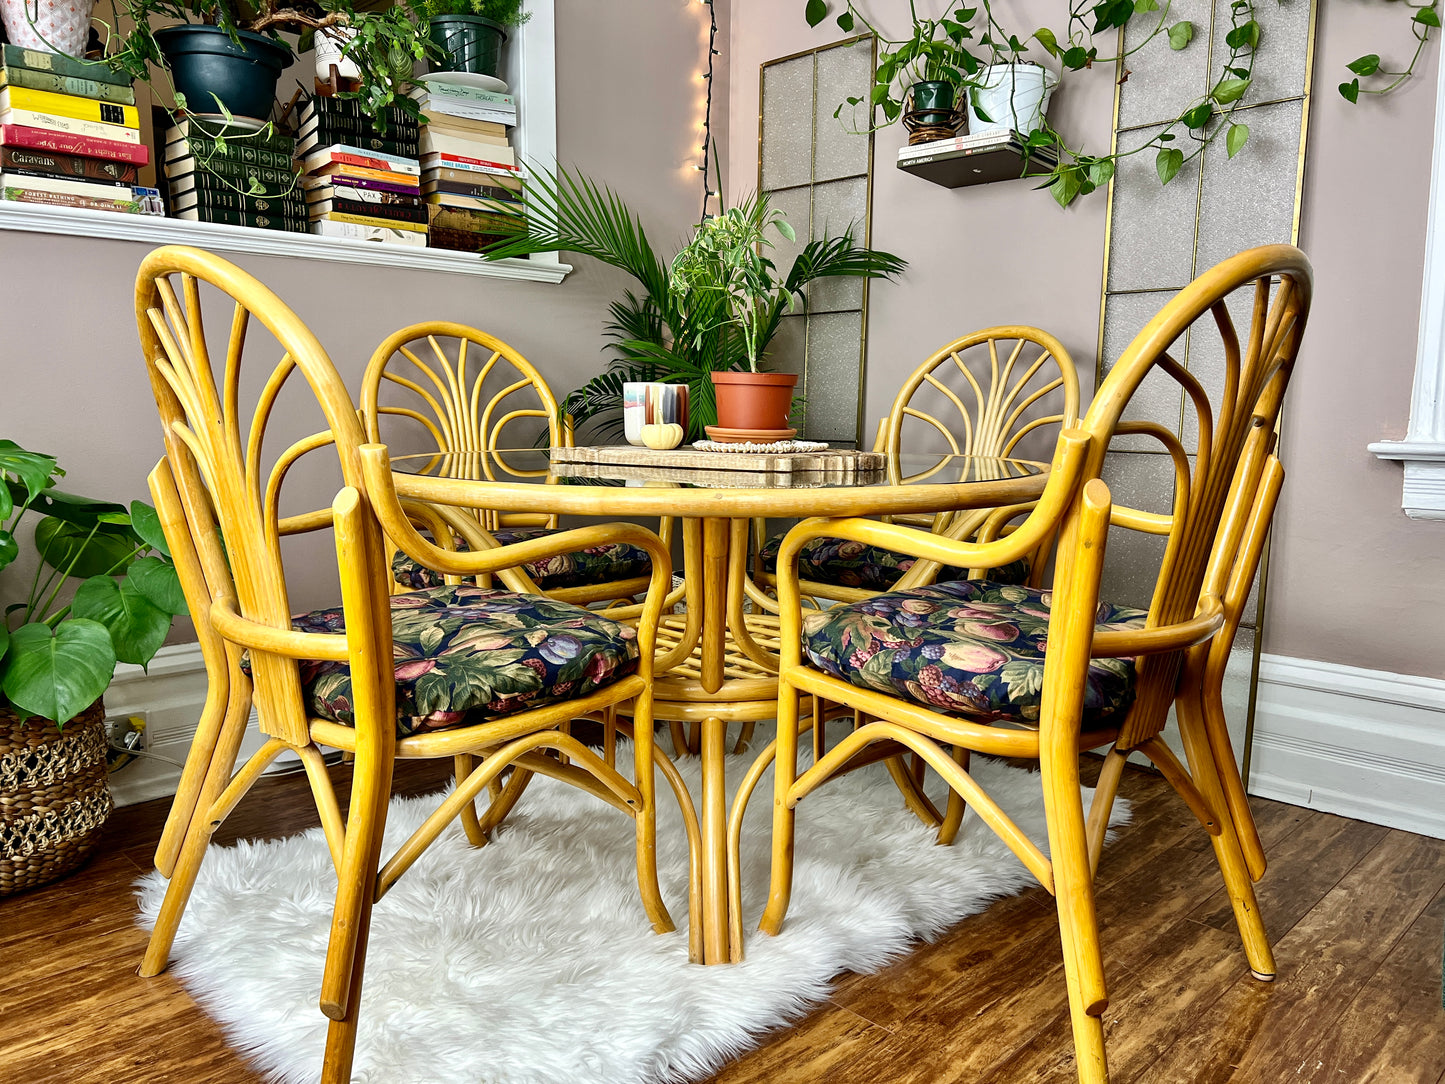 The Orchard Rattan Dining Set